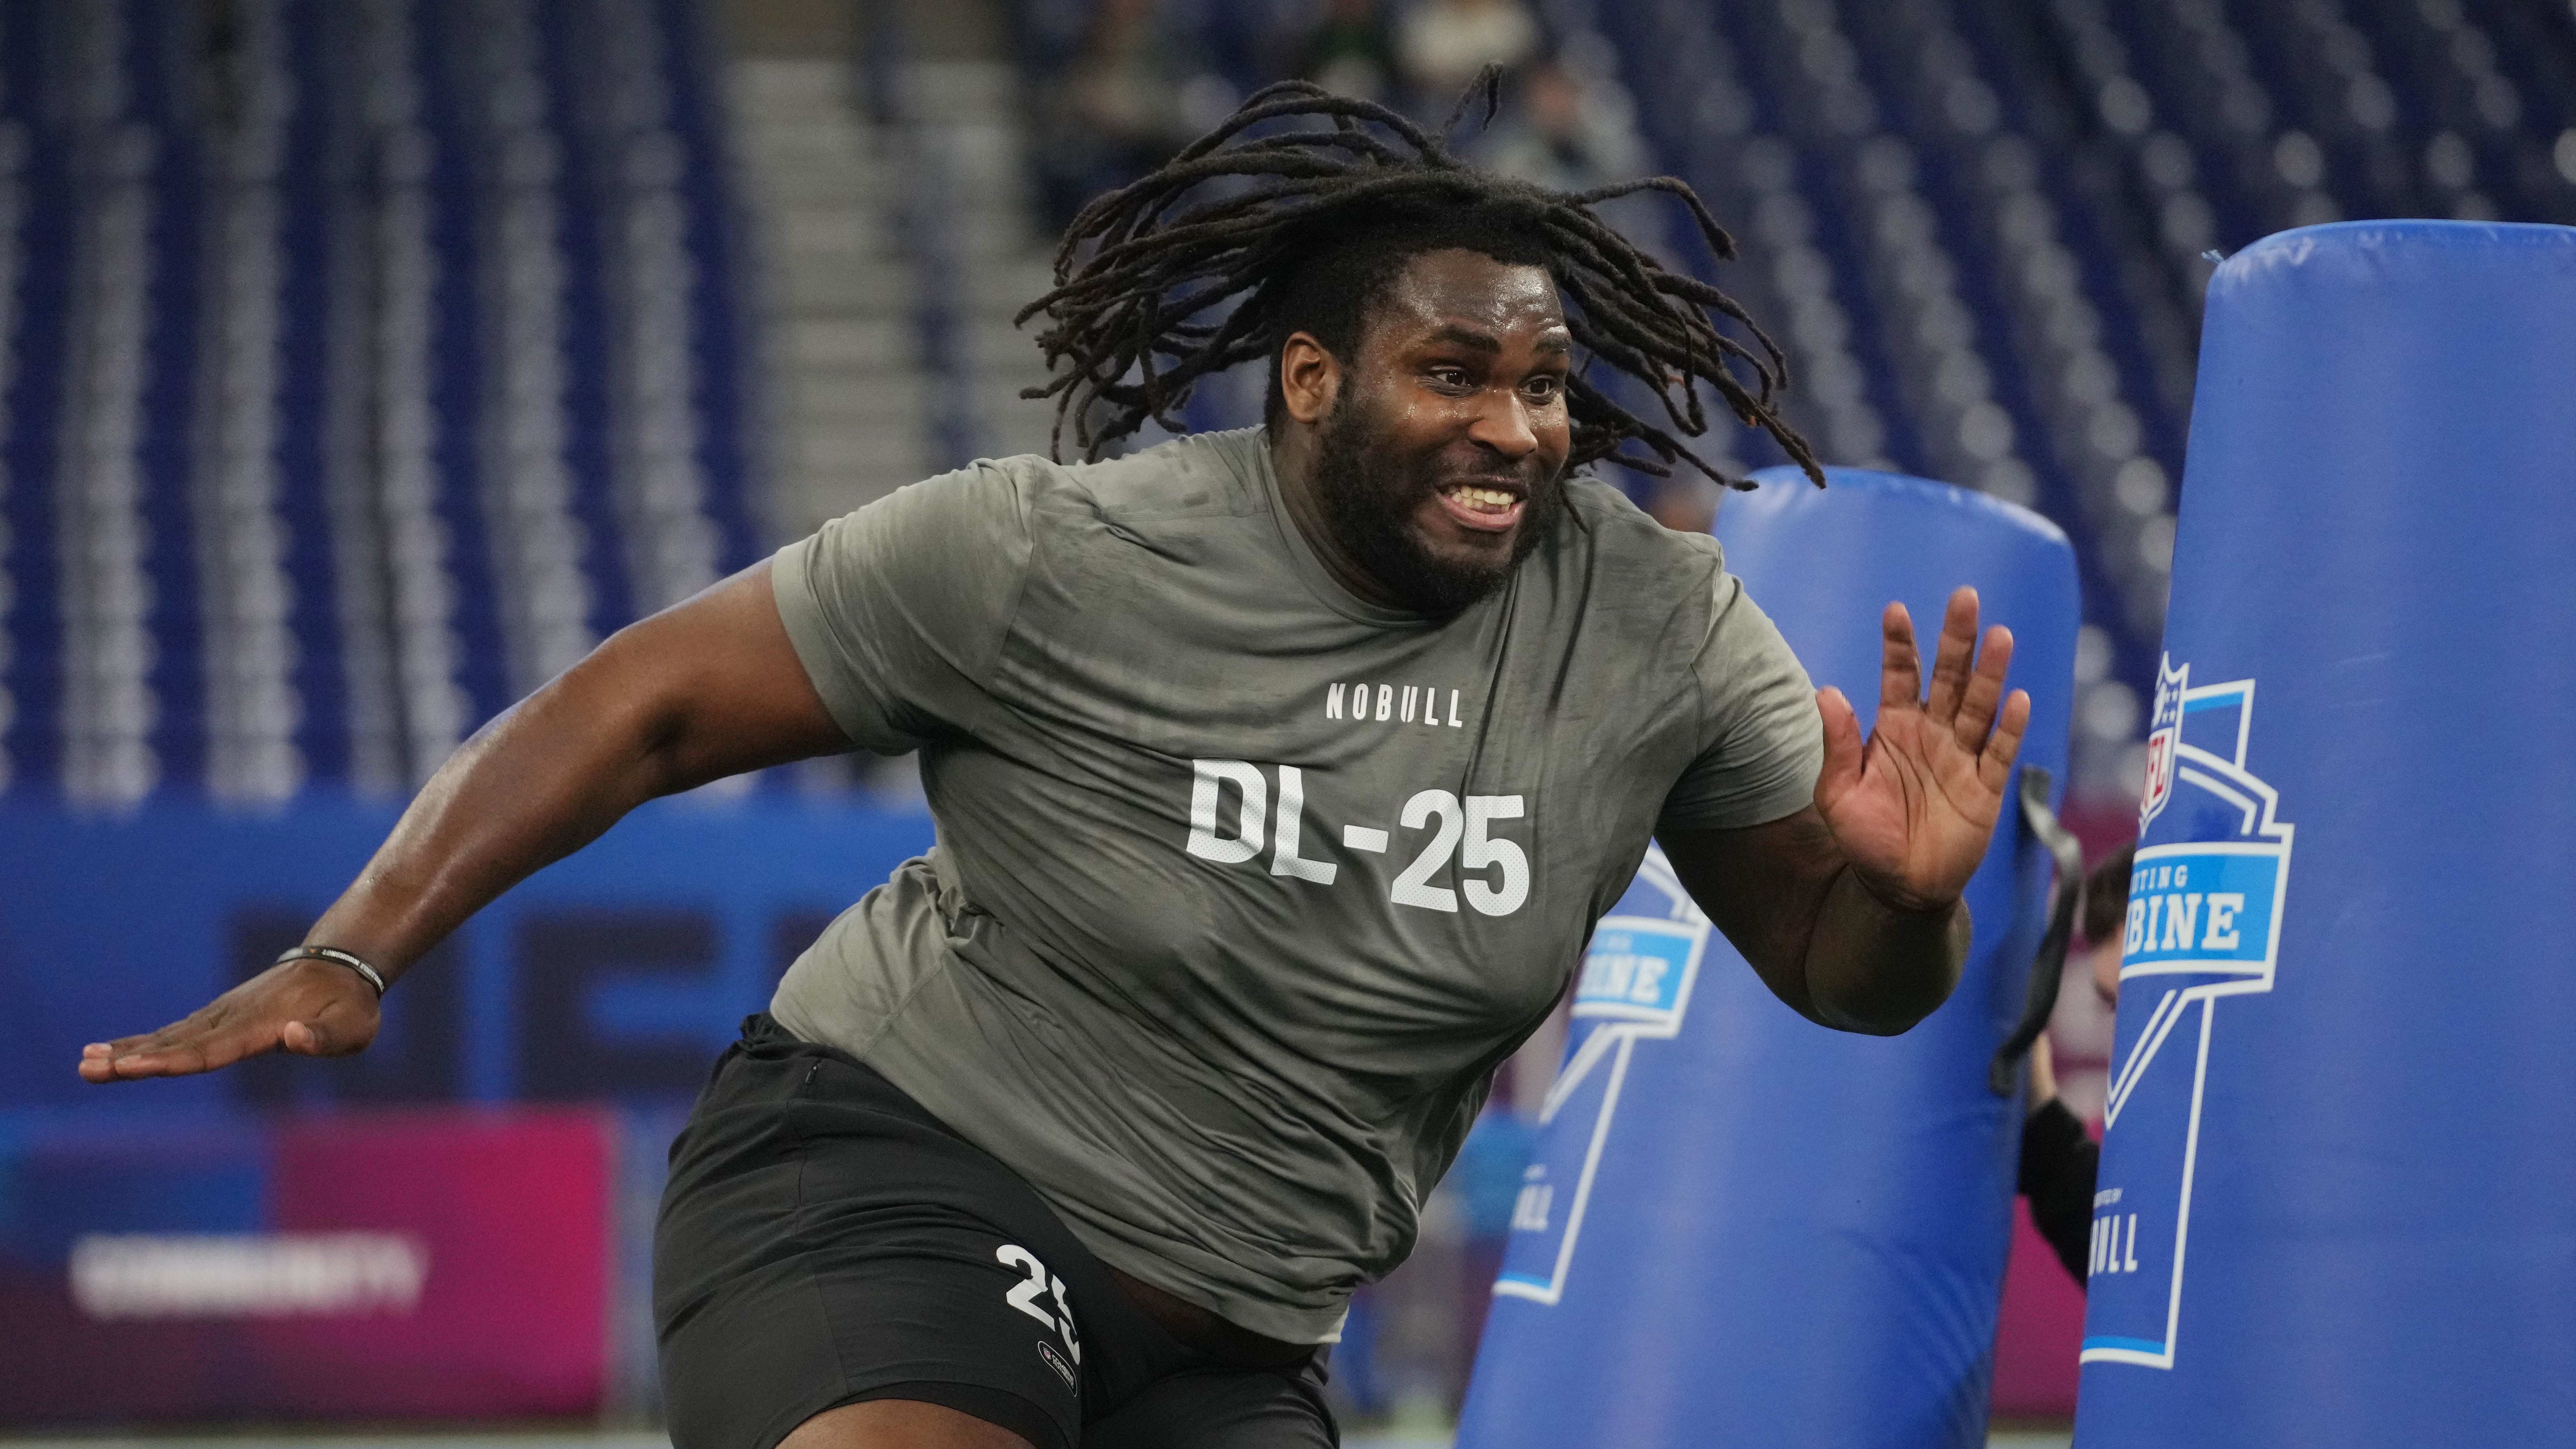 Texas defensive lineman T'Vondre Sweat (DL25) works out during the NFL Scouting Combine.